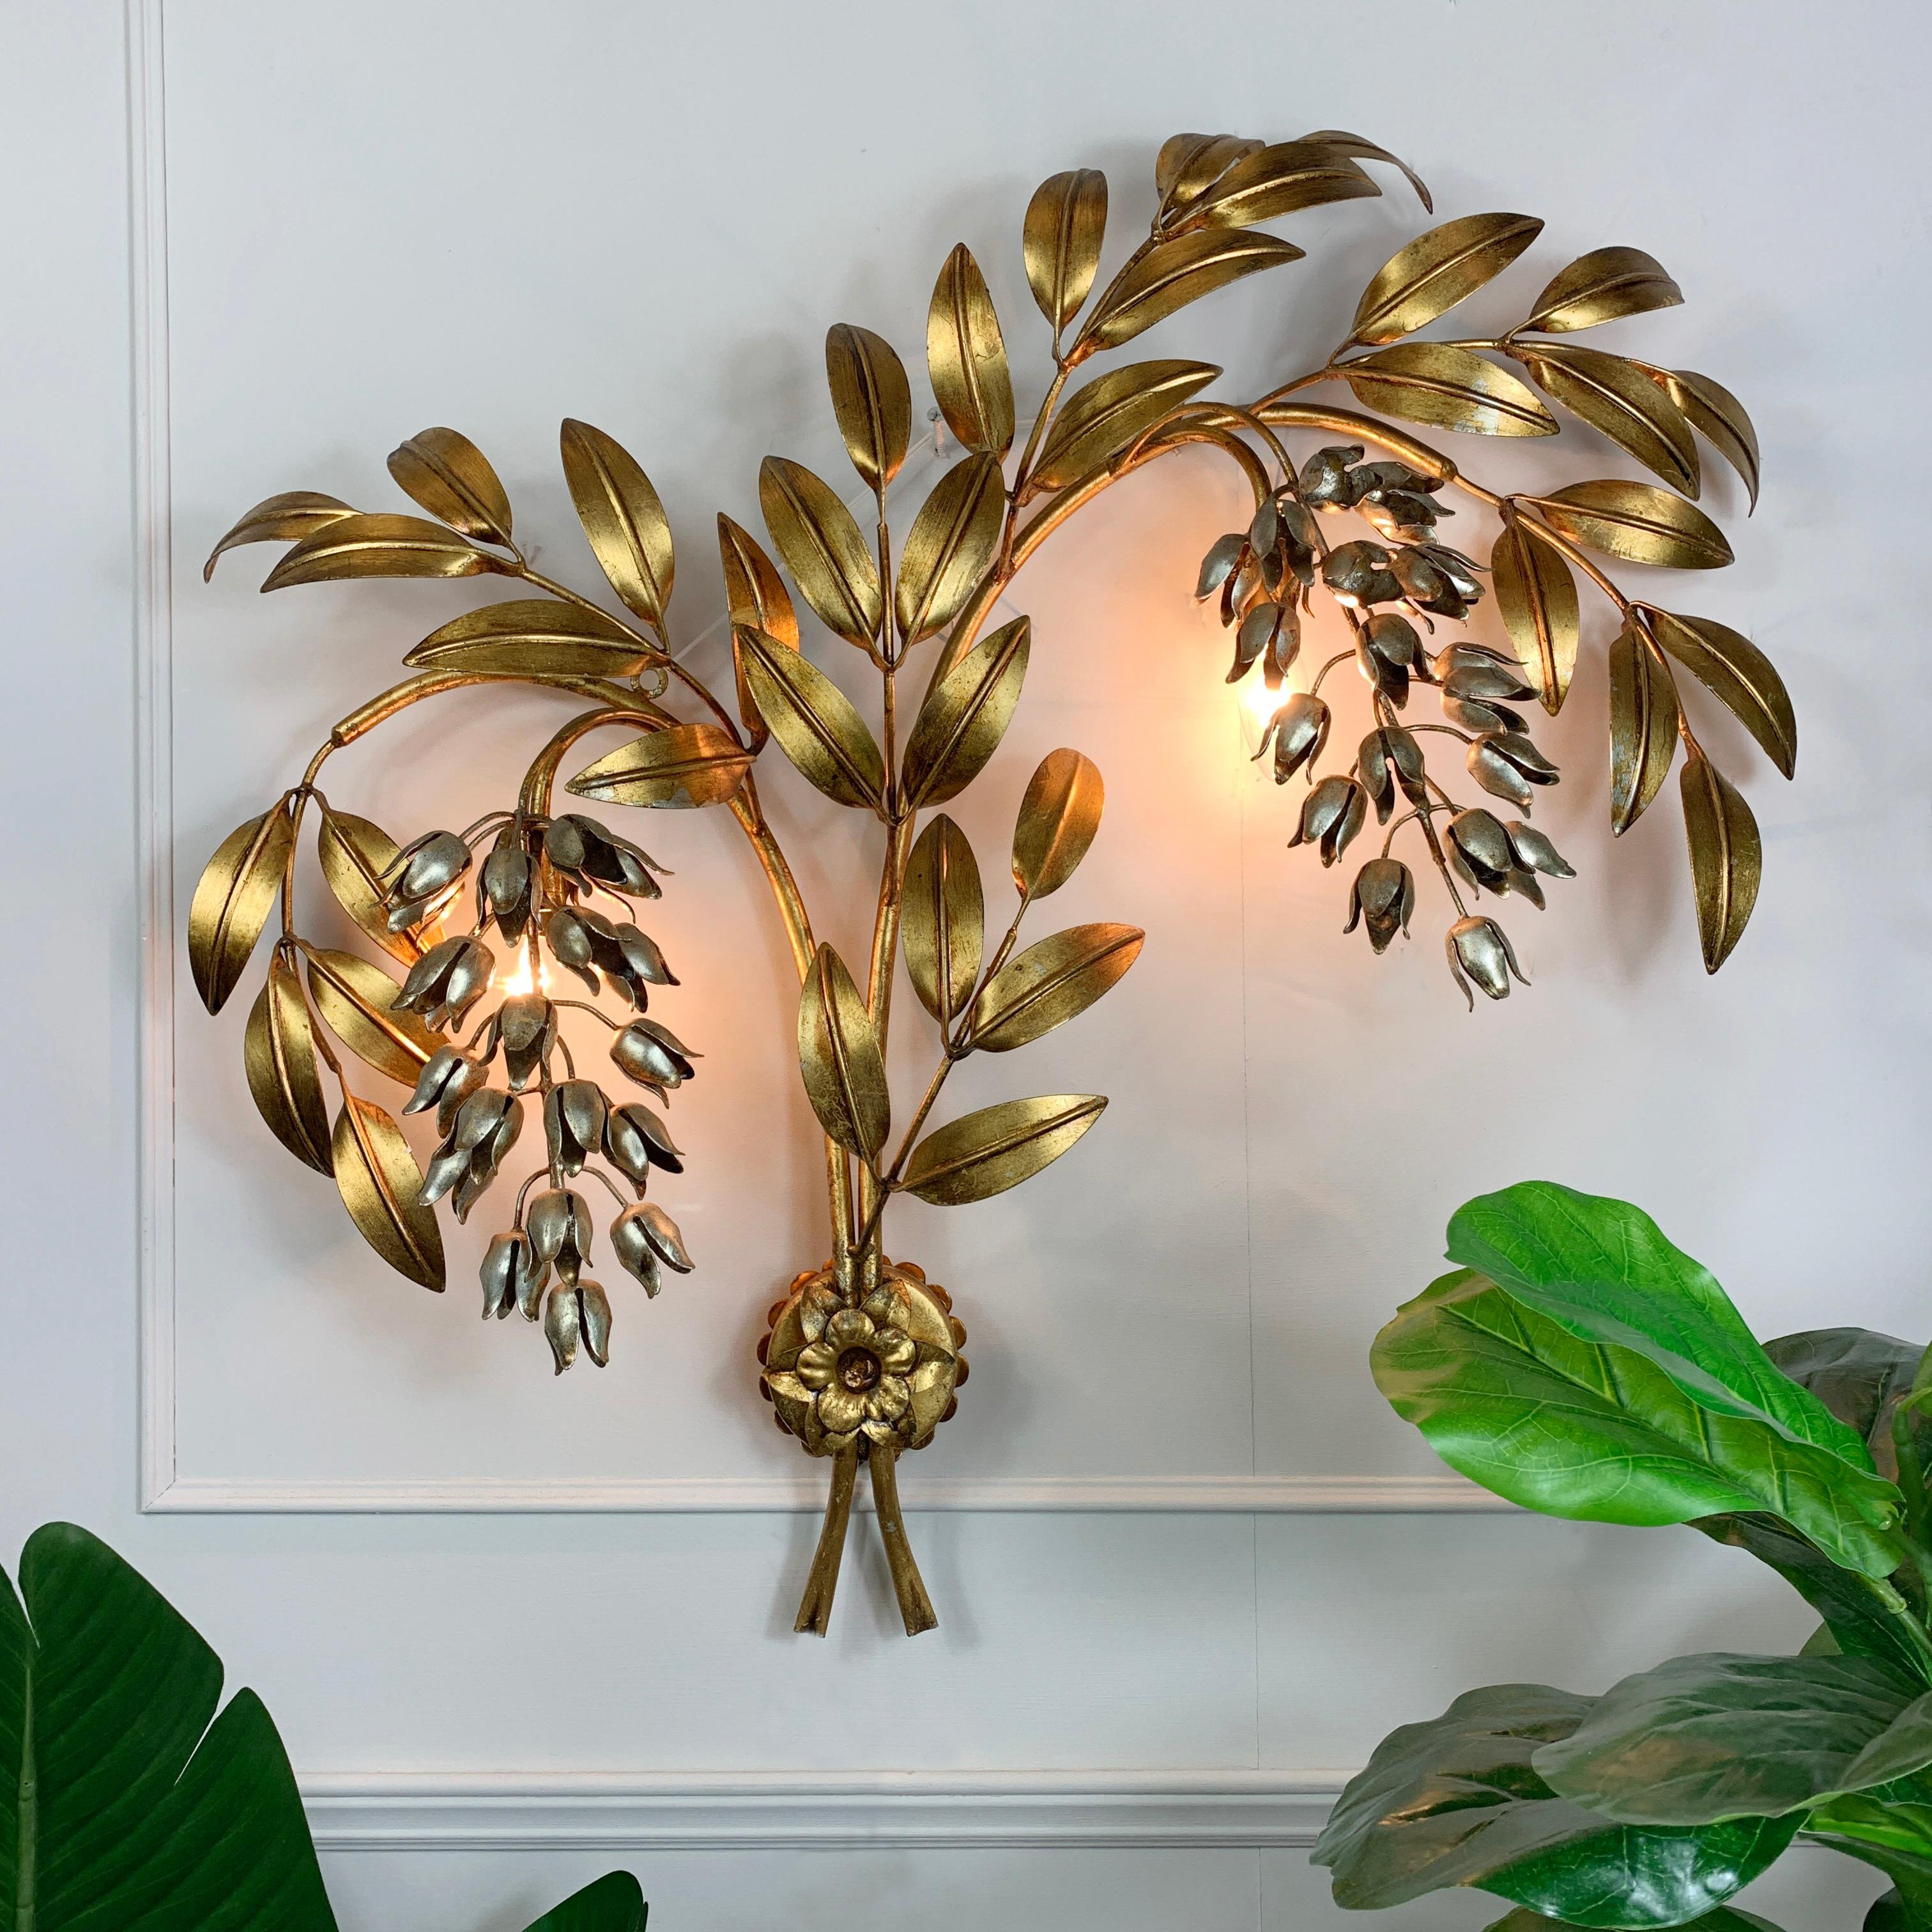 Monumental and impressive, original Hans Kogl Pioggia D'oro wall sconce

Large gold plated leaved branches with hanging silver wisteria flowers
by the world renowned designer Hans Kogl

The sconce takes 2 single e14 bulbs, hidden behind each of